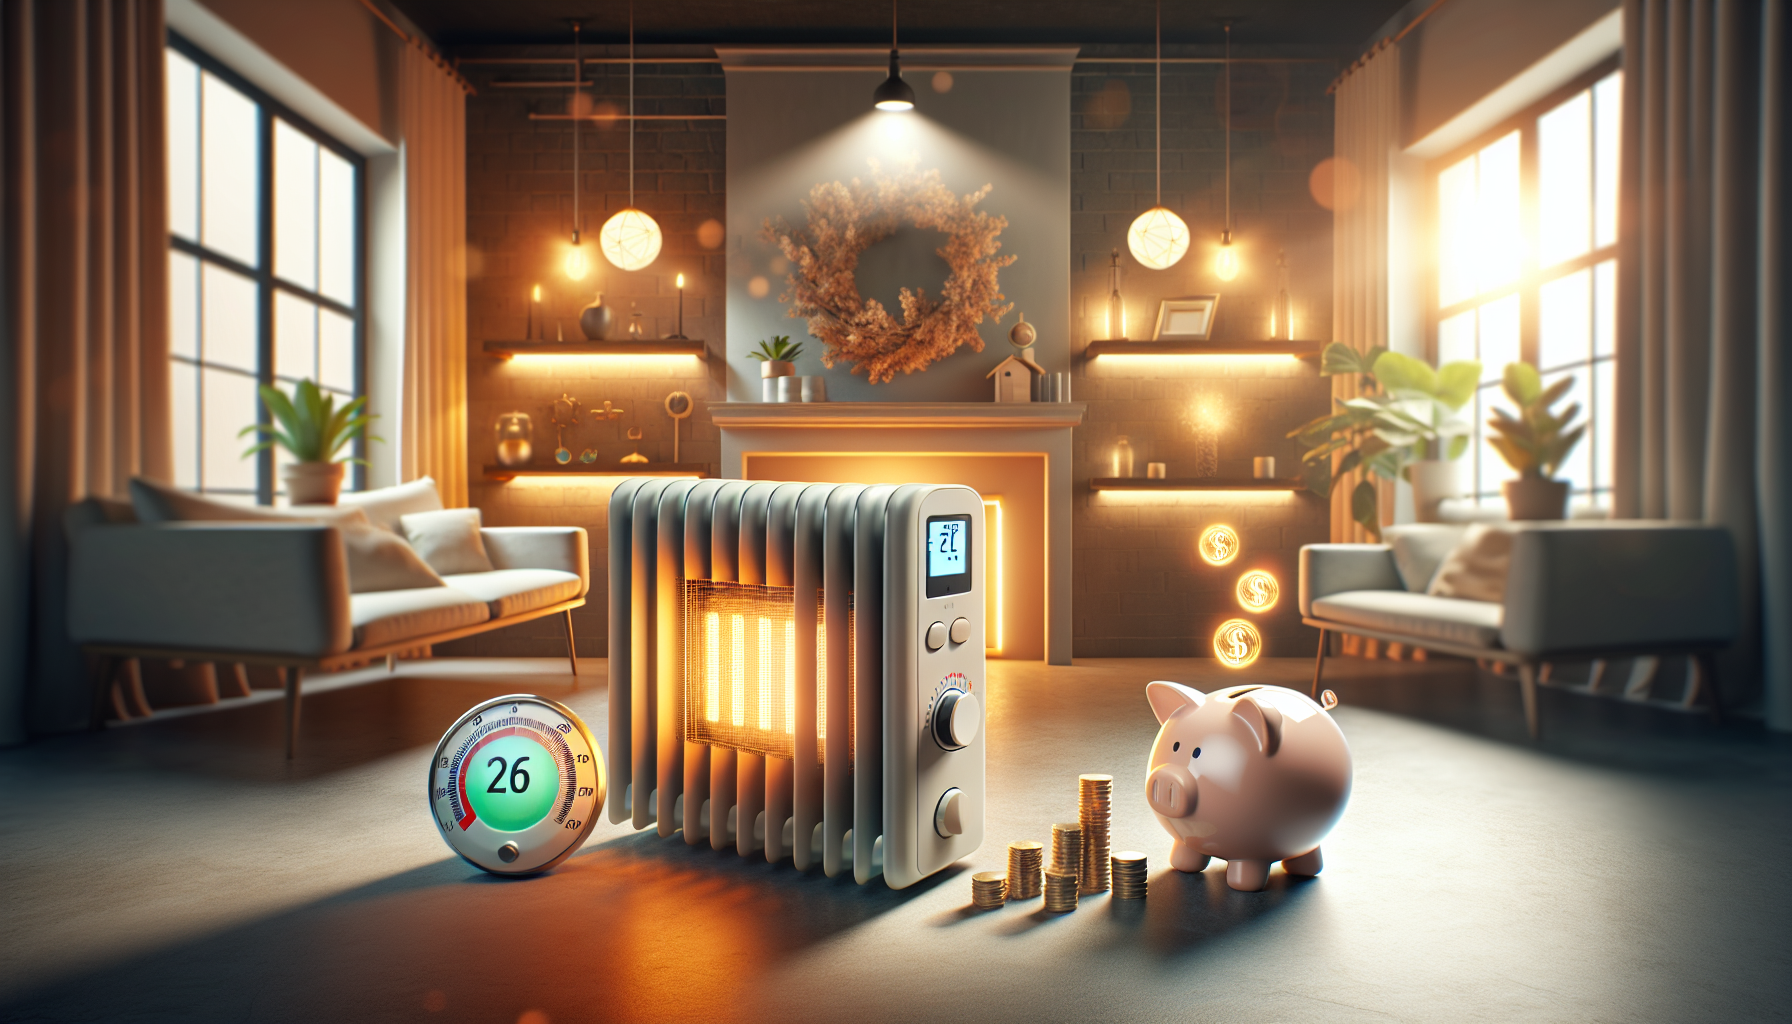 Can Space Heaters Help Reduce Heating Bills in an Apartment?